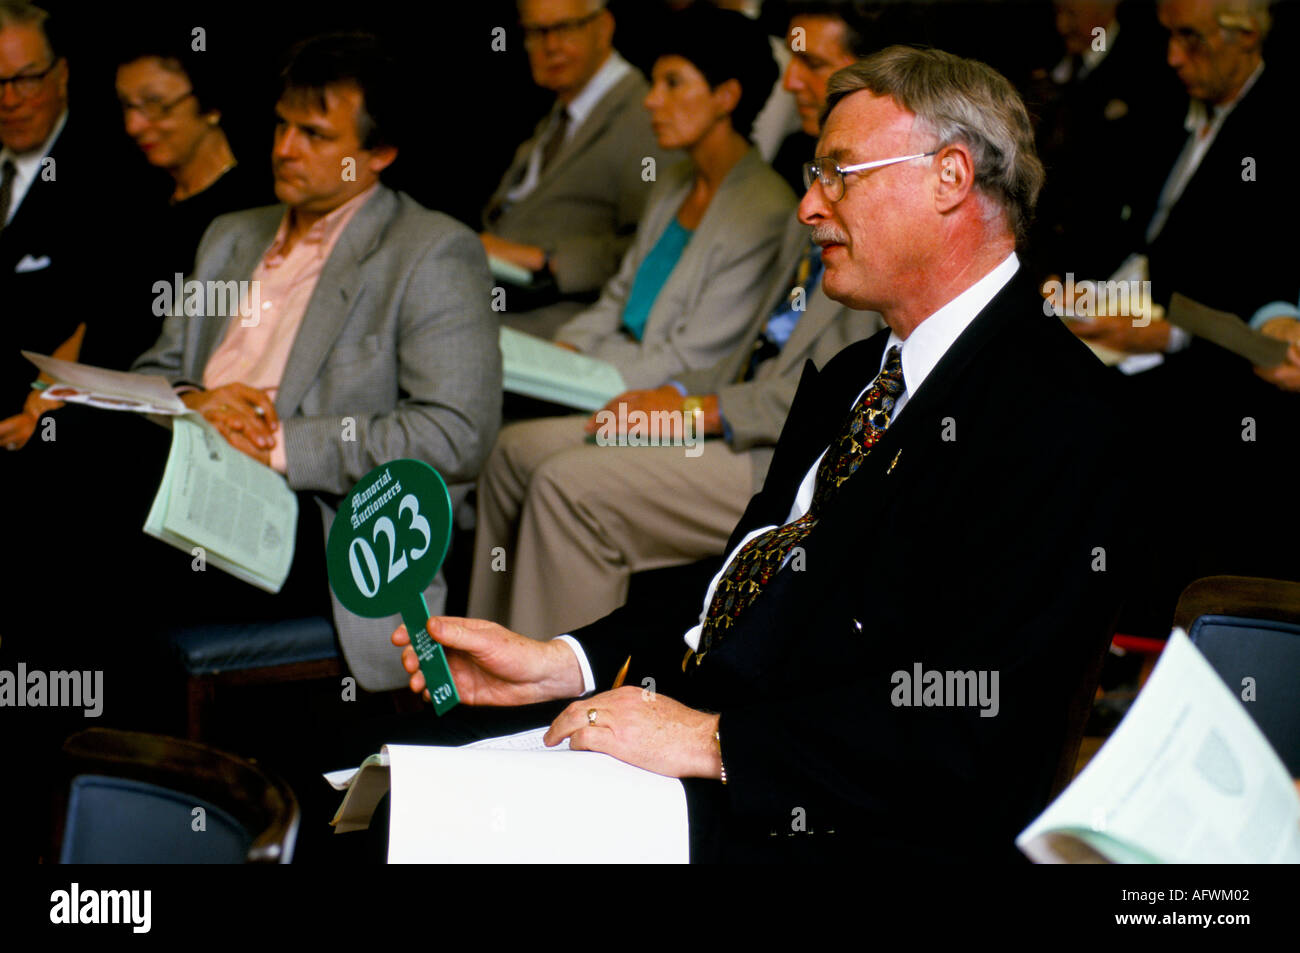 Auction London 1990s Uk. People attend Manorial Auctions, Lord of the Manor title deeds being auctioned man holding 'paddle' with number HOMER SYKES Stock Photo